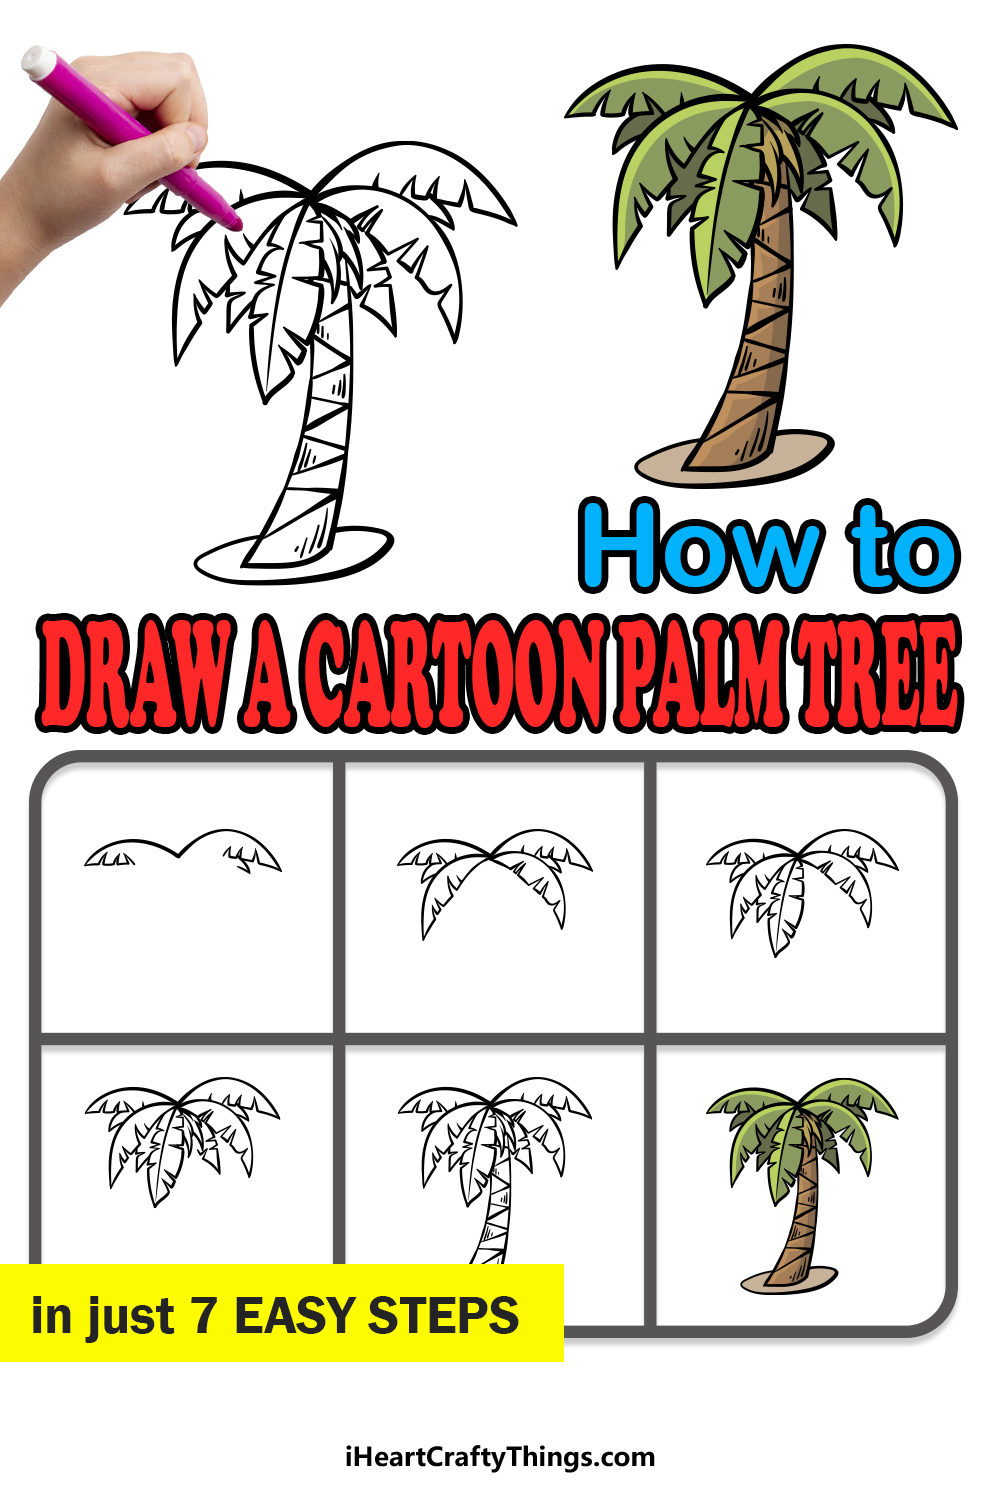 how to draw a cartoon palm tree in 7 easy steps